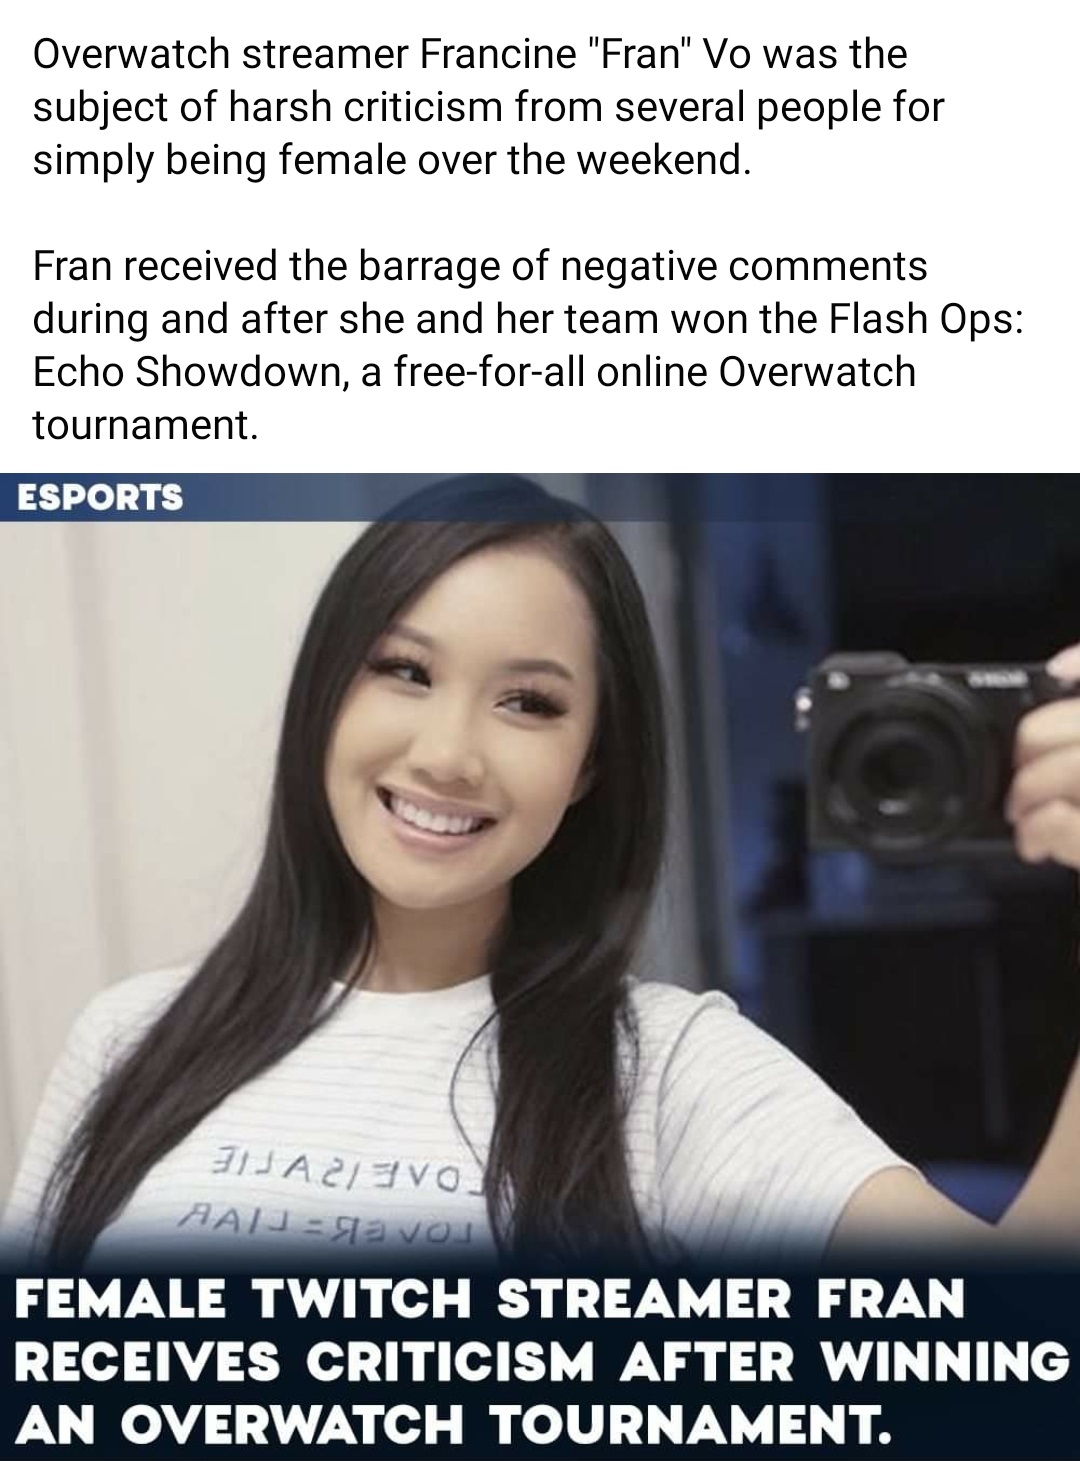 photo caption - Overwatch streamer Francine "Fran" Vo was the subject of harsh criticism from several people for simply being female over the weekend. Fran received the barrage of negative during and after she and her team won the Flash Ops Echo Showdown,